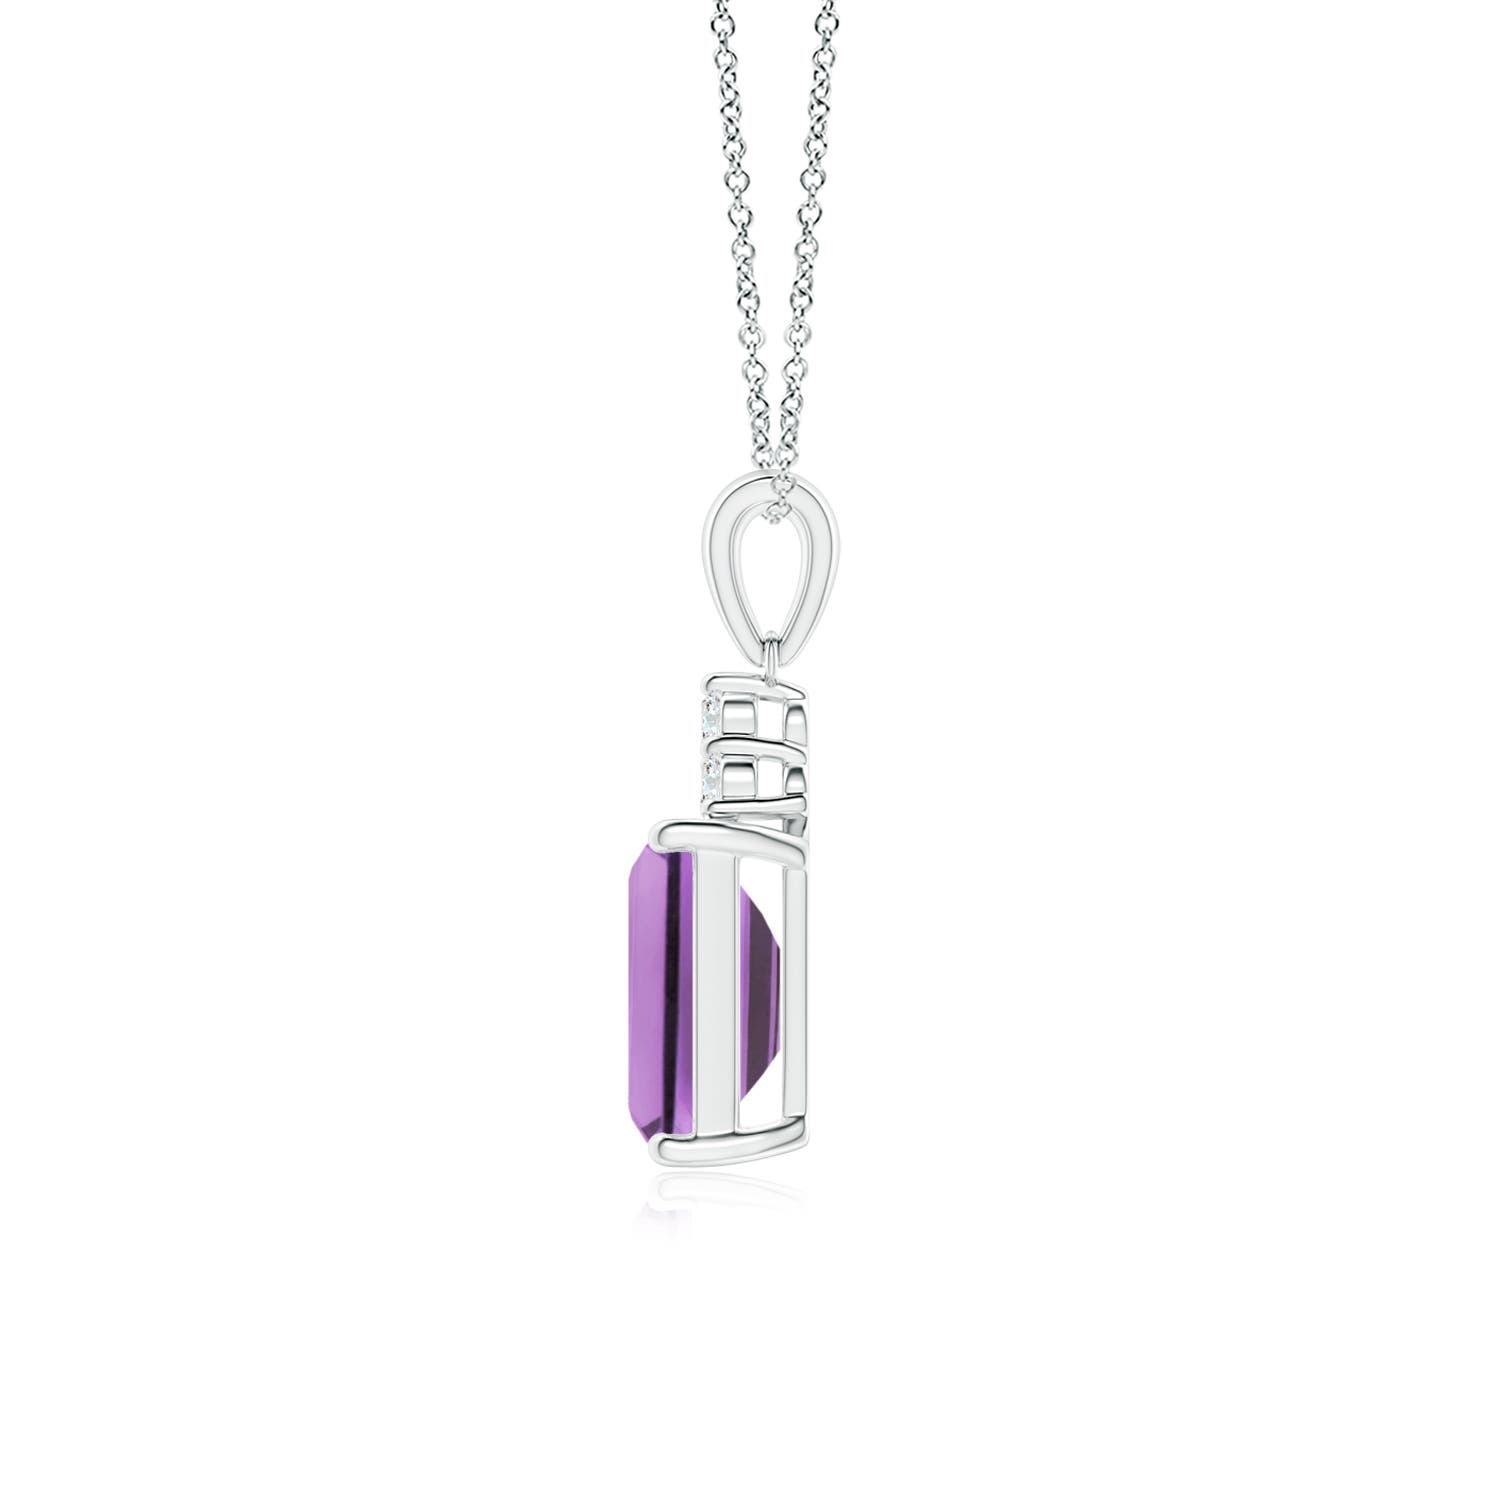 A - Amethyst / 1.56 CT / 14 KT White Gold